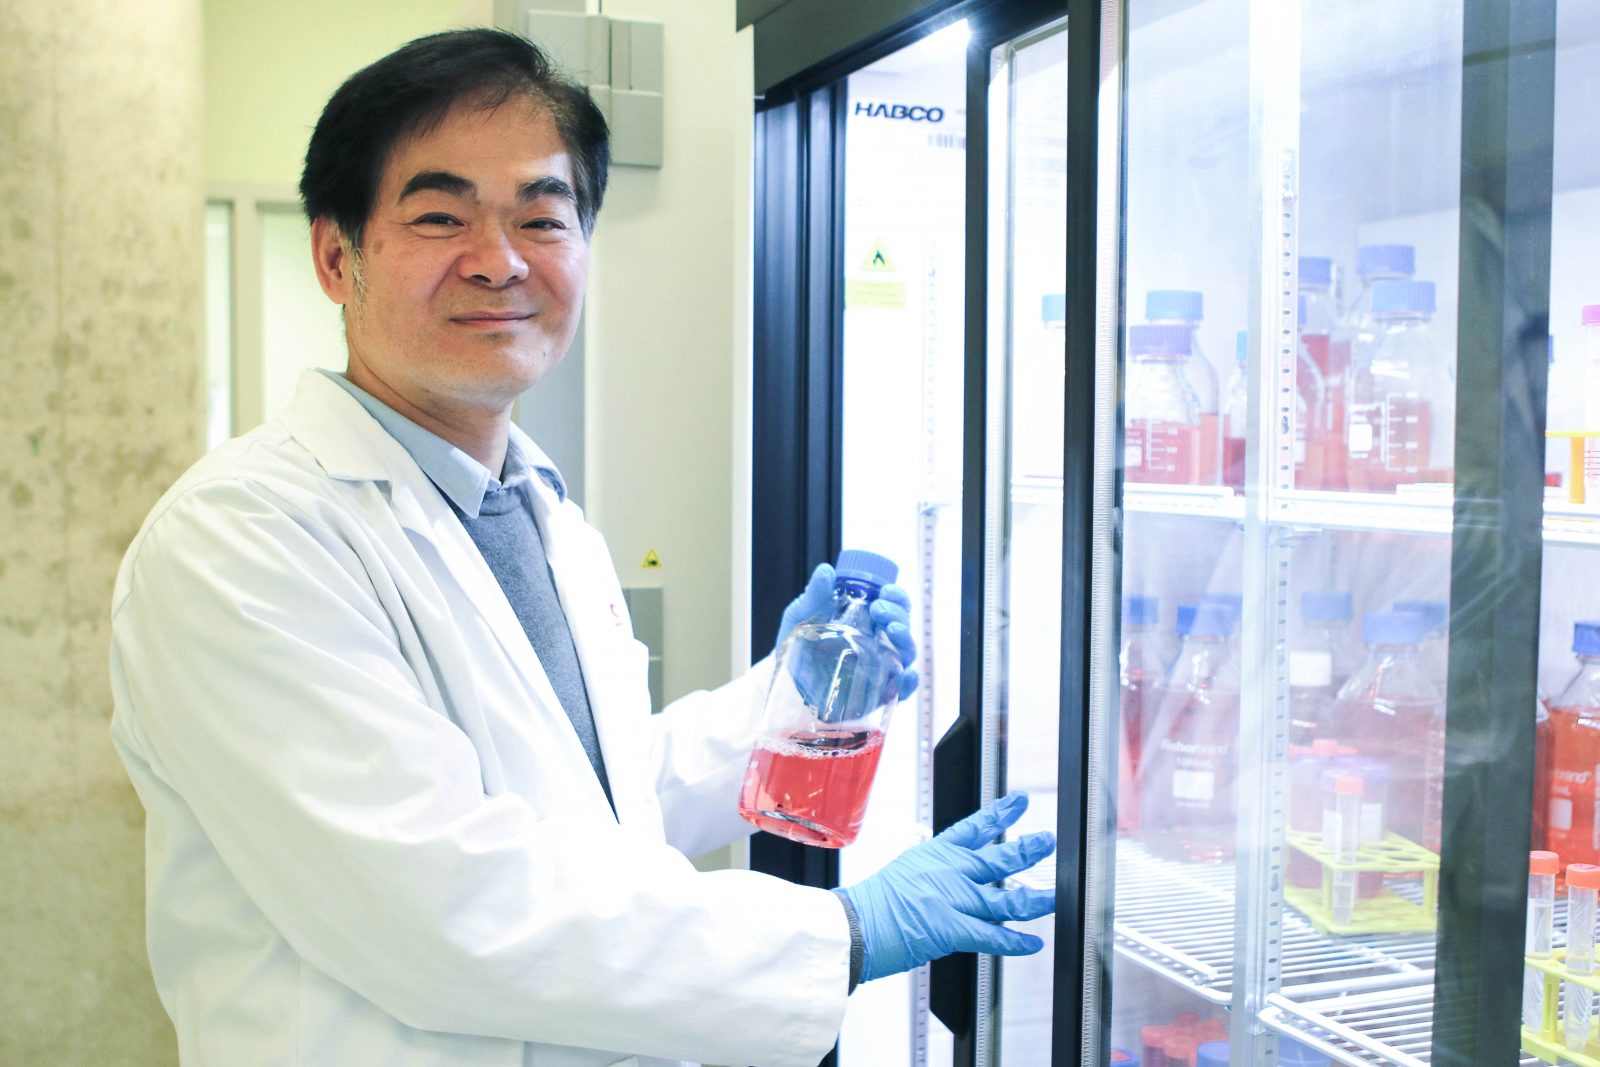 Brock University Professor of Health Sciences Newman Sze, who is the Canada Research Chair in Mechanisms of Health and Disease, and his international team have discovered a groundbreaking immunotherapy method that could potentially add years to healthy aging.